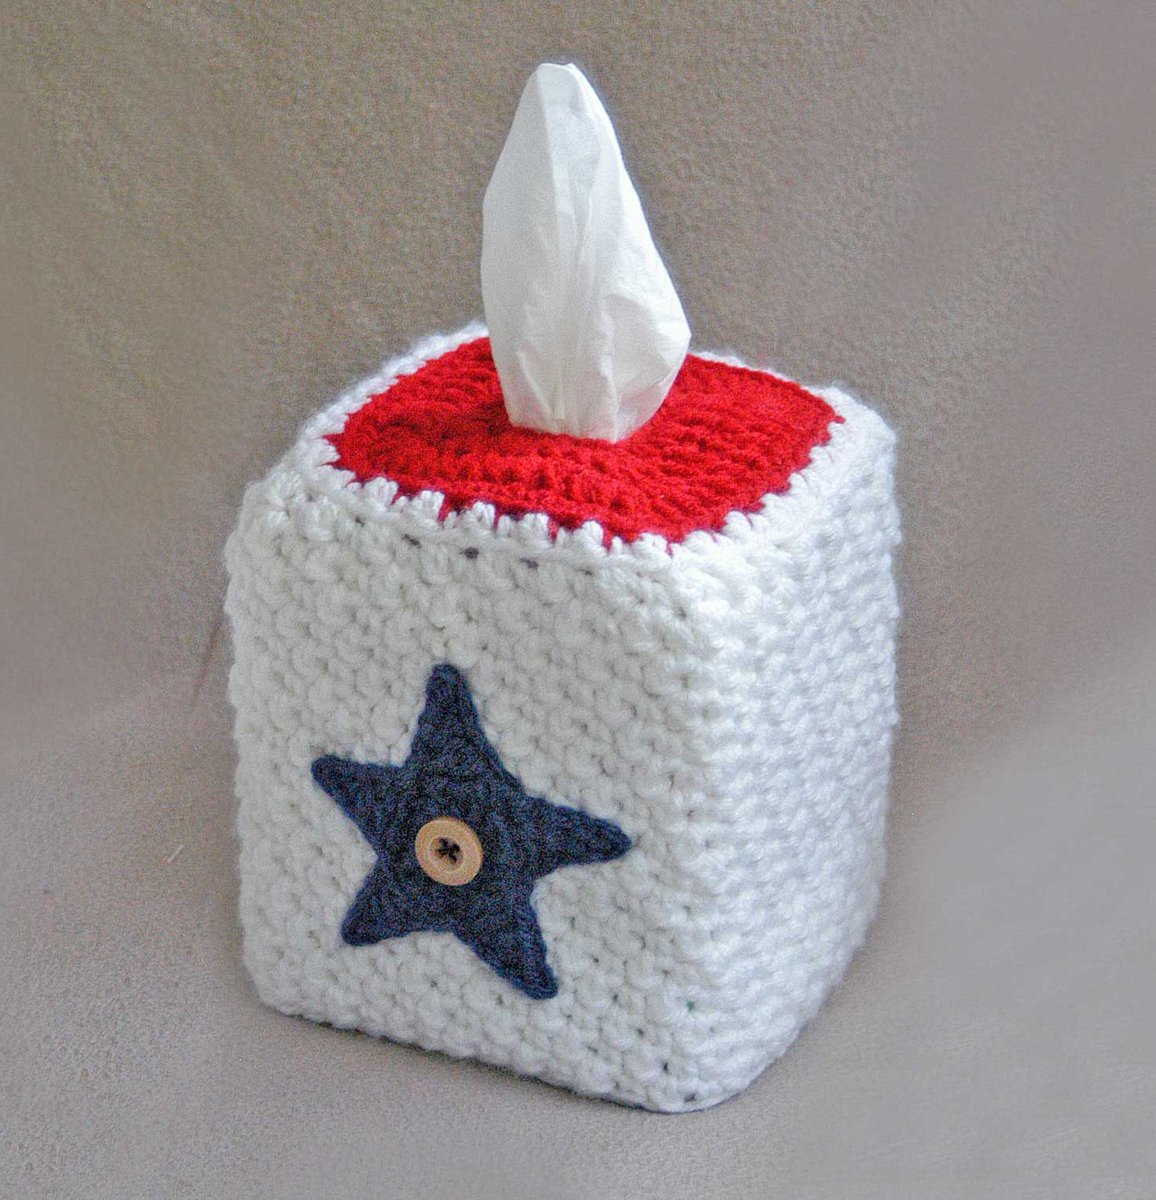 🌿🇺🇸🌿LAST DAY of Sale! Look at this Patriotic Decor Tissue Box Cover nutmegcottage.etsy.com/listing/173262… #patriotic #Americana #USA #MemorialDay #Mondayvibes #May27th #OnSale #etsy #pottiteam